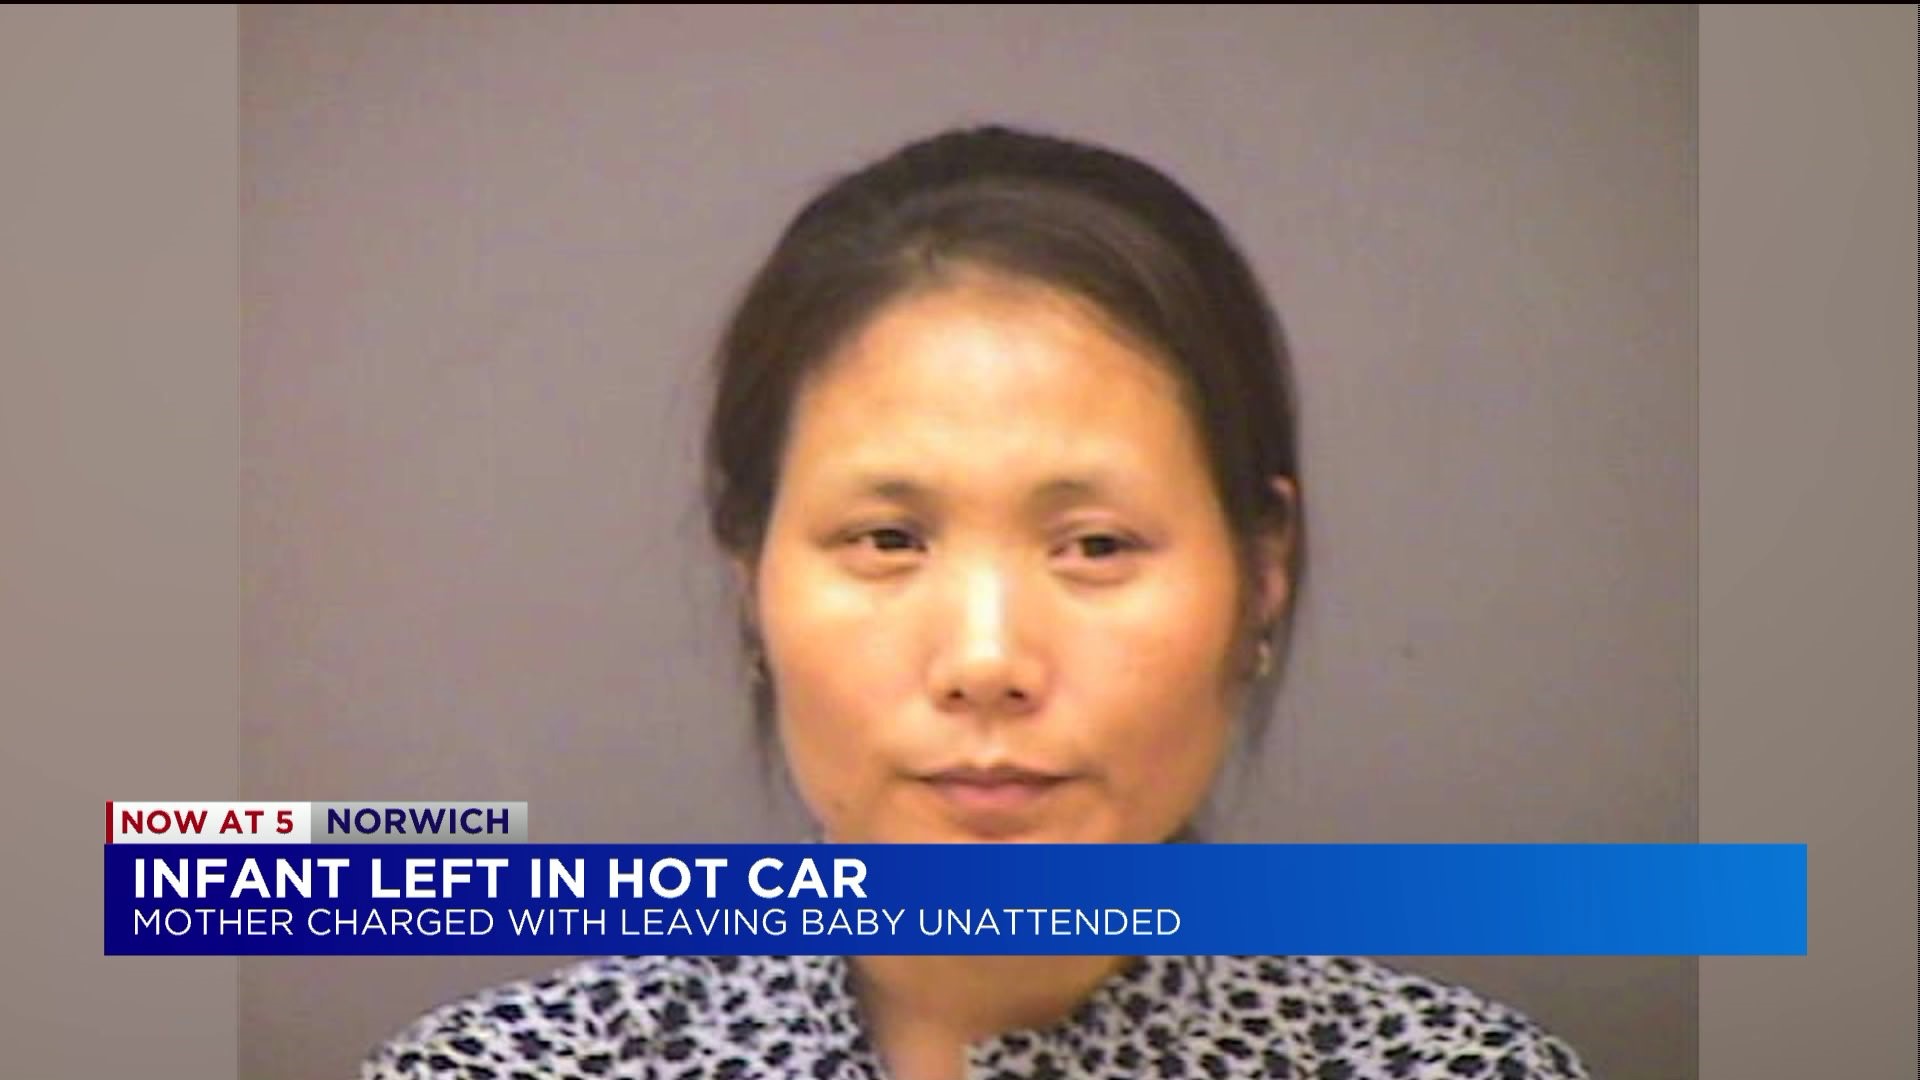 Mother arrested for leaving 1-year-old in hot car in Norwich